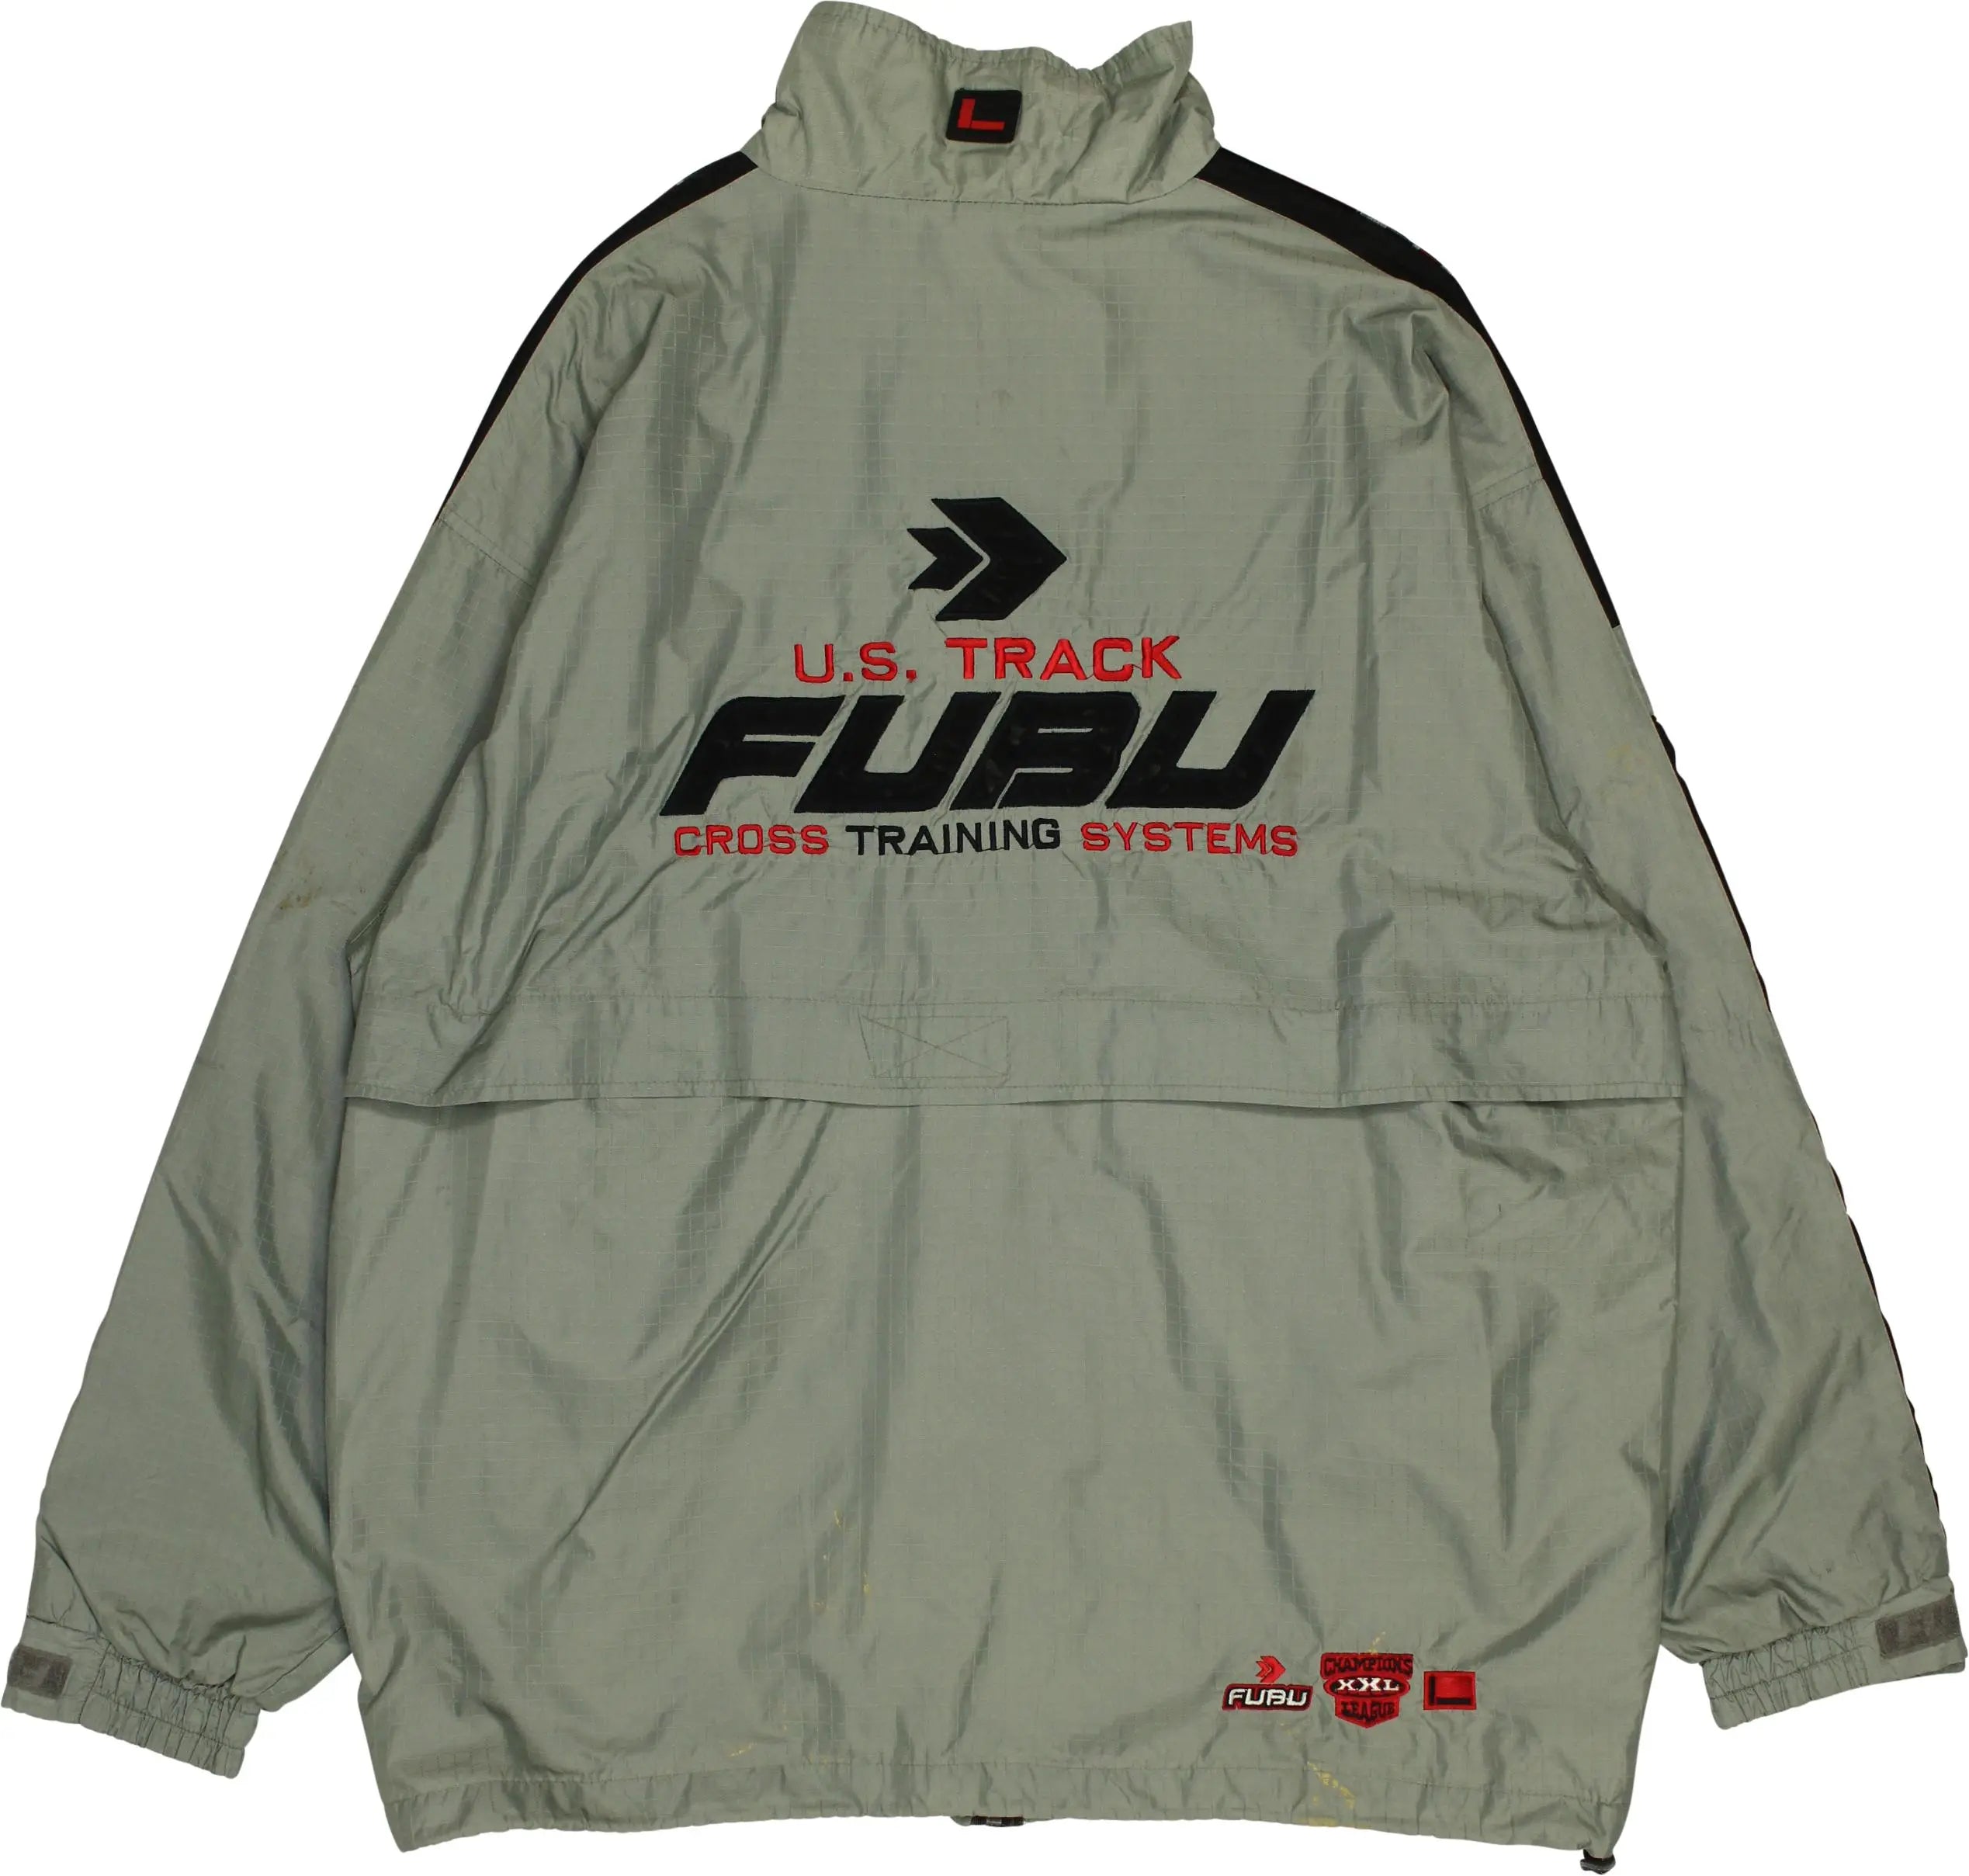 Fubu - Green Track Jacket by Fubu- ThriftTale.com - Vintage and second handclothing